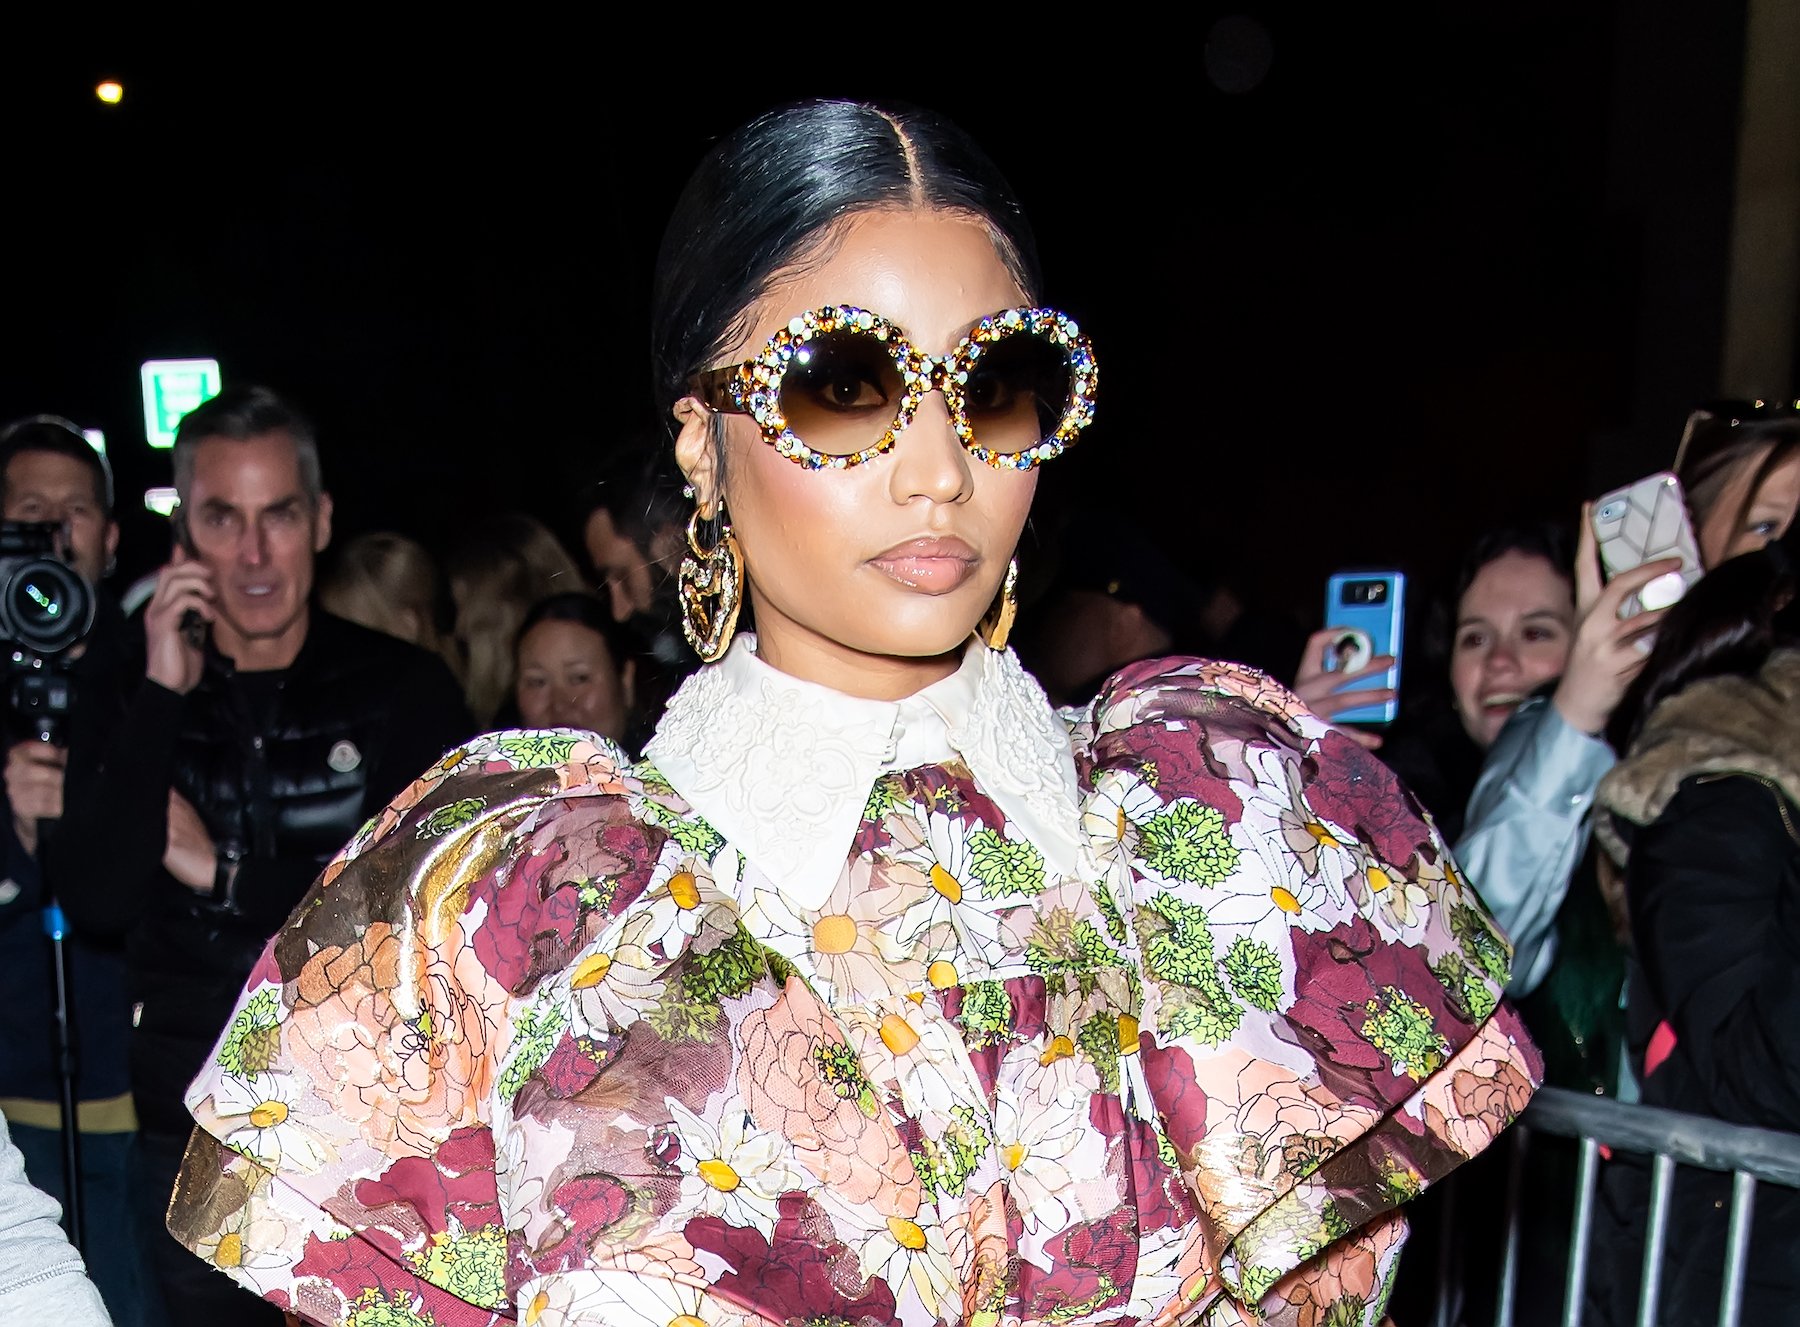 Nicki Minaj, who was snubbed from the Grammys rap category in 2022, wearing a floral top